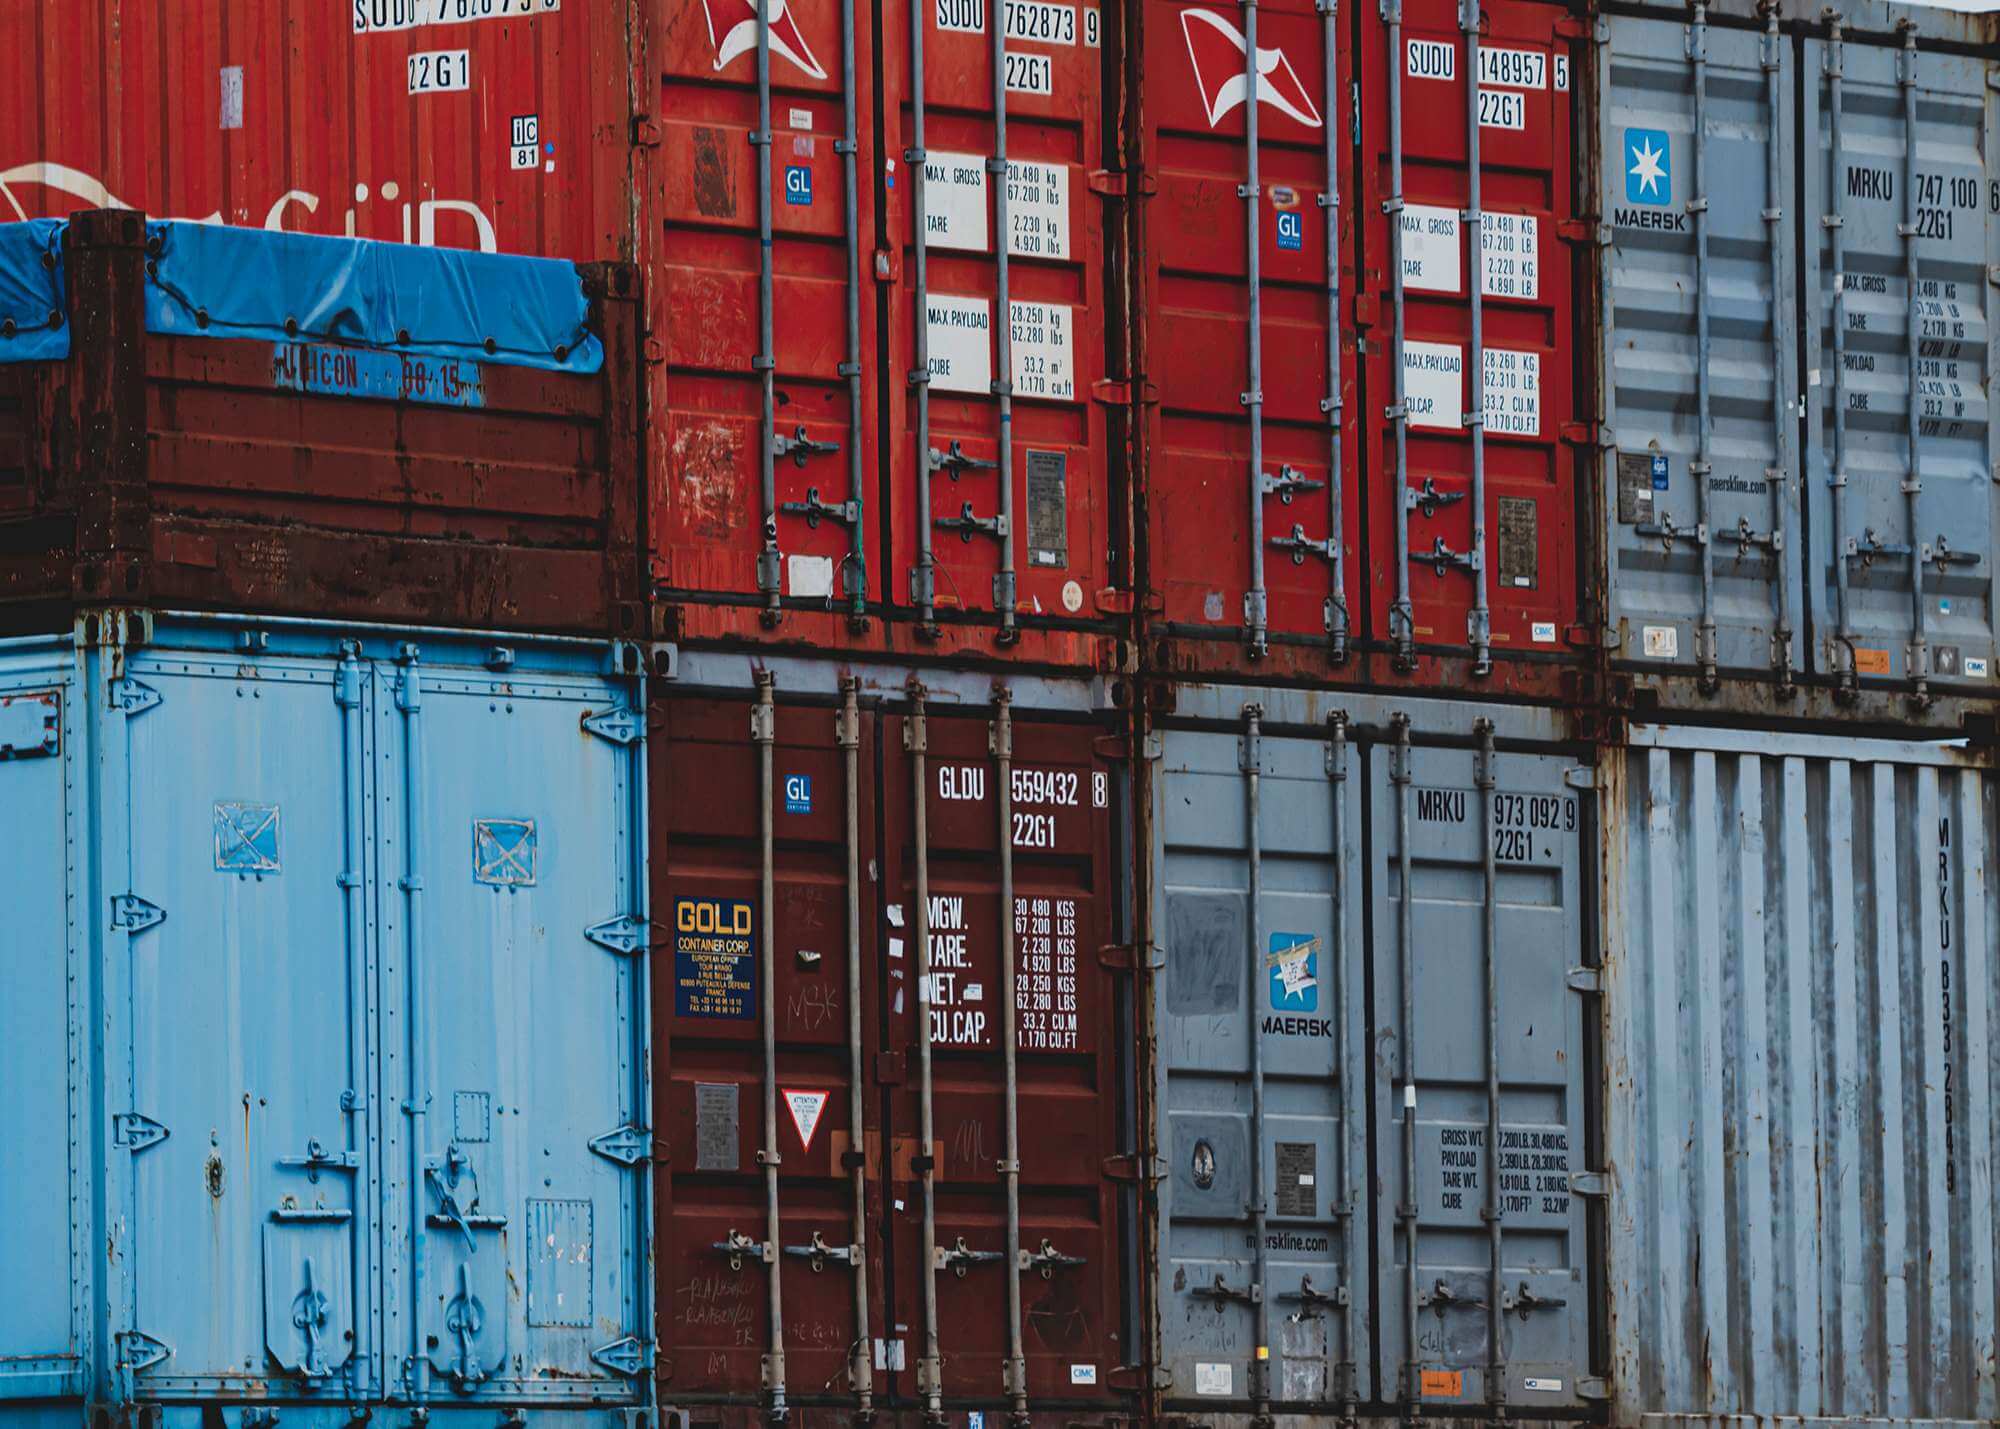 Container equipment costs twice the price in the span of one year